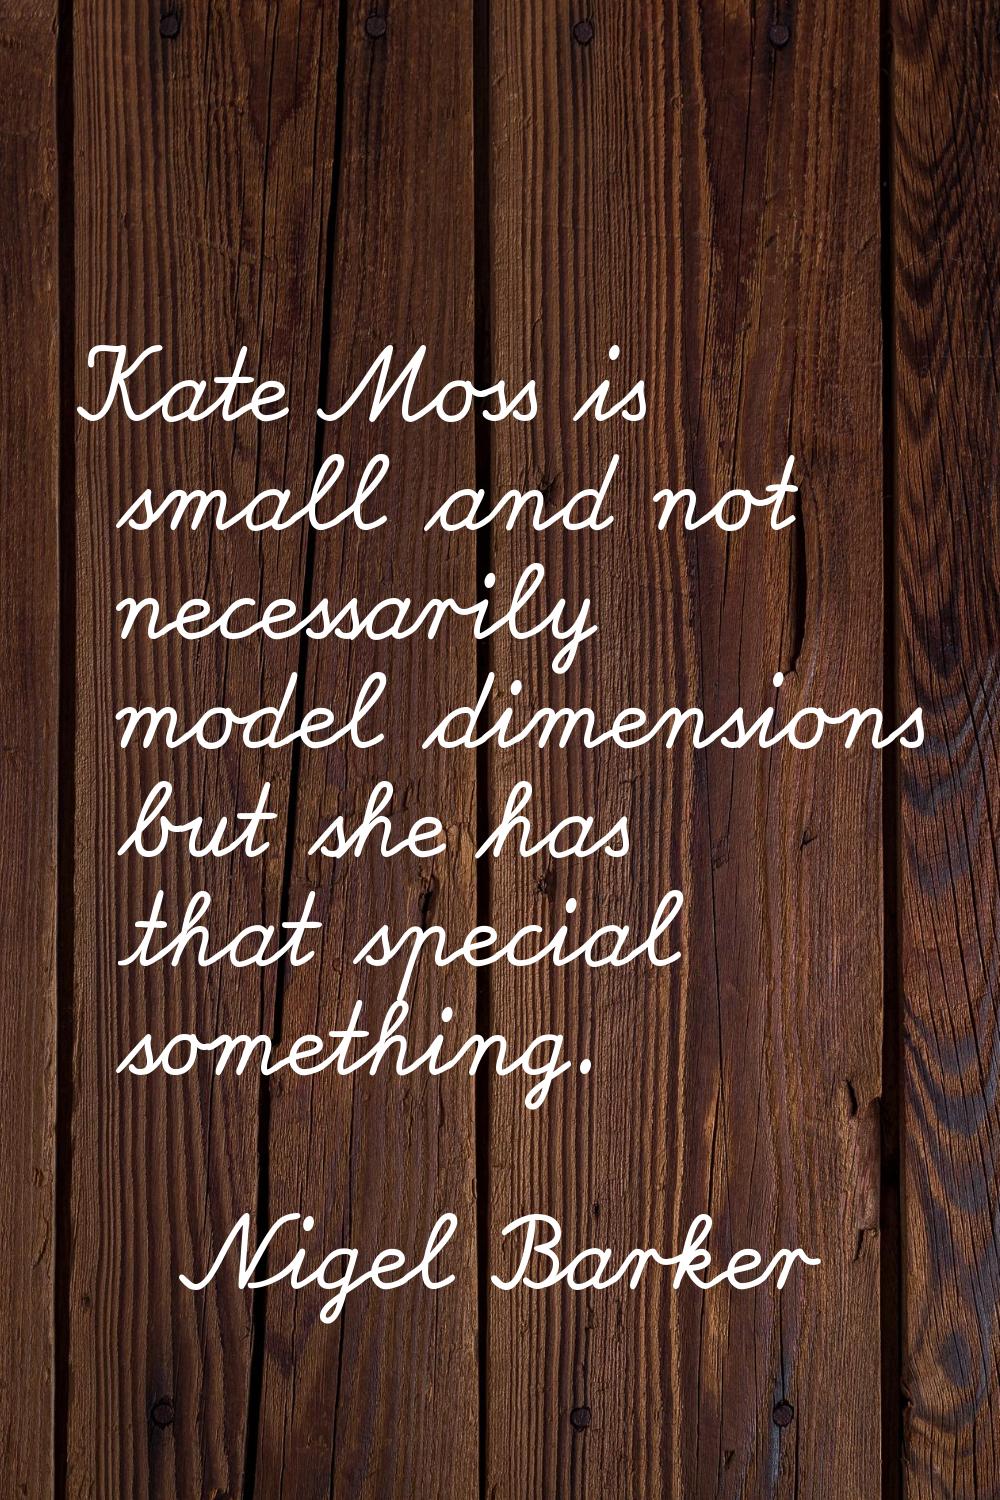 Kate Moss is small and not necessarily model dimensions but she has that special something.